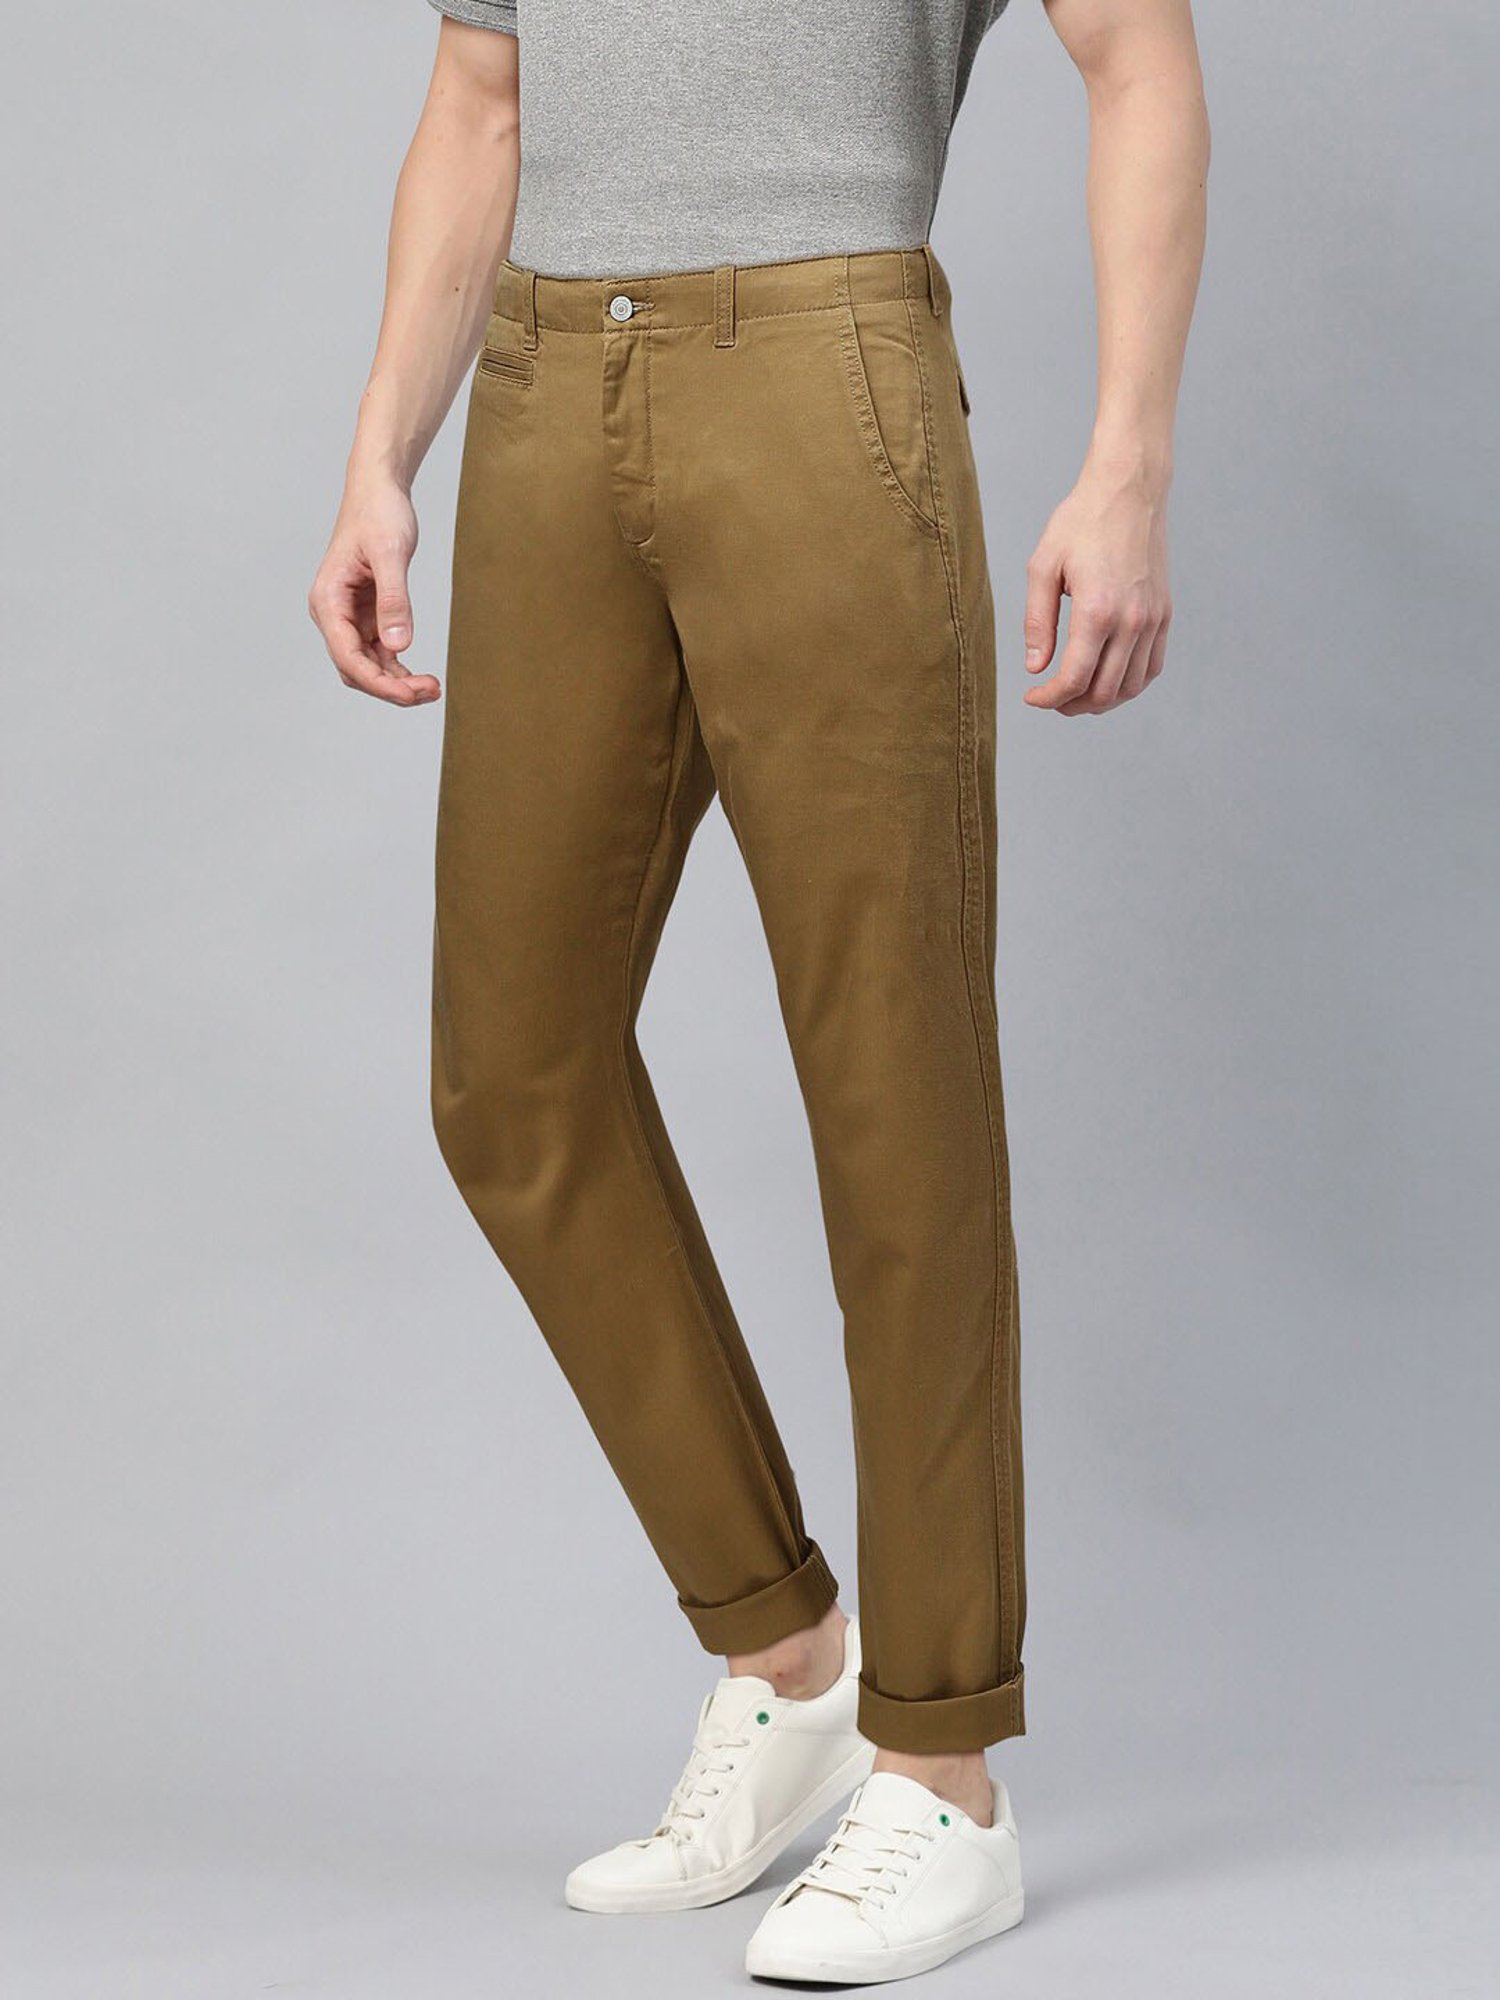 Levis Trousers  Buy Levis Trousers Online in India